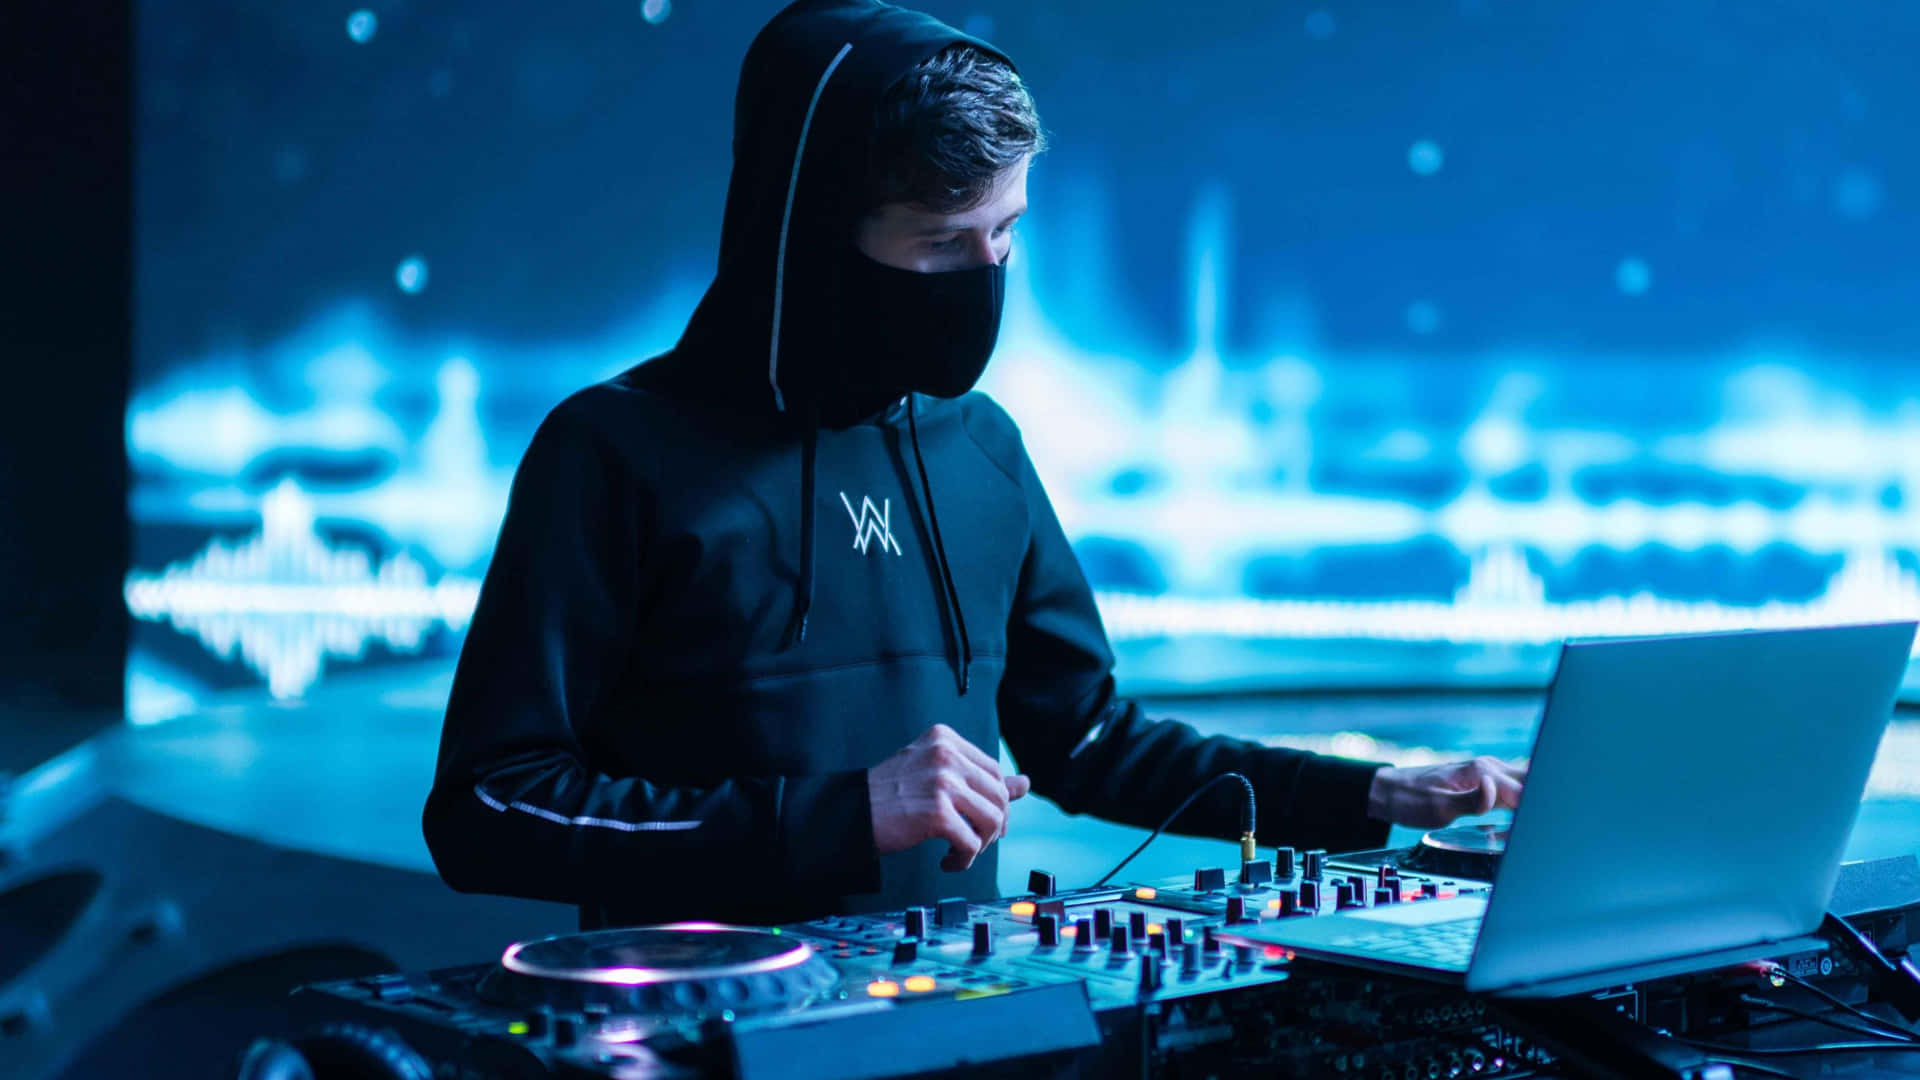 Alan Walker performing live on stage with a dynamic light show